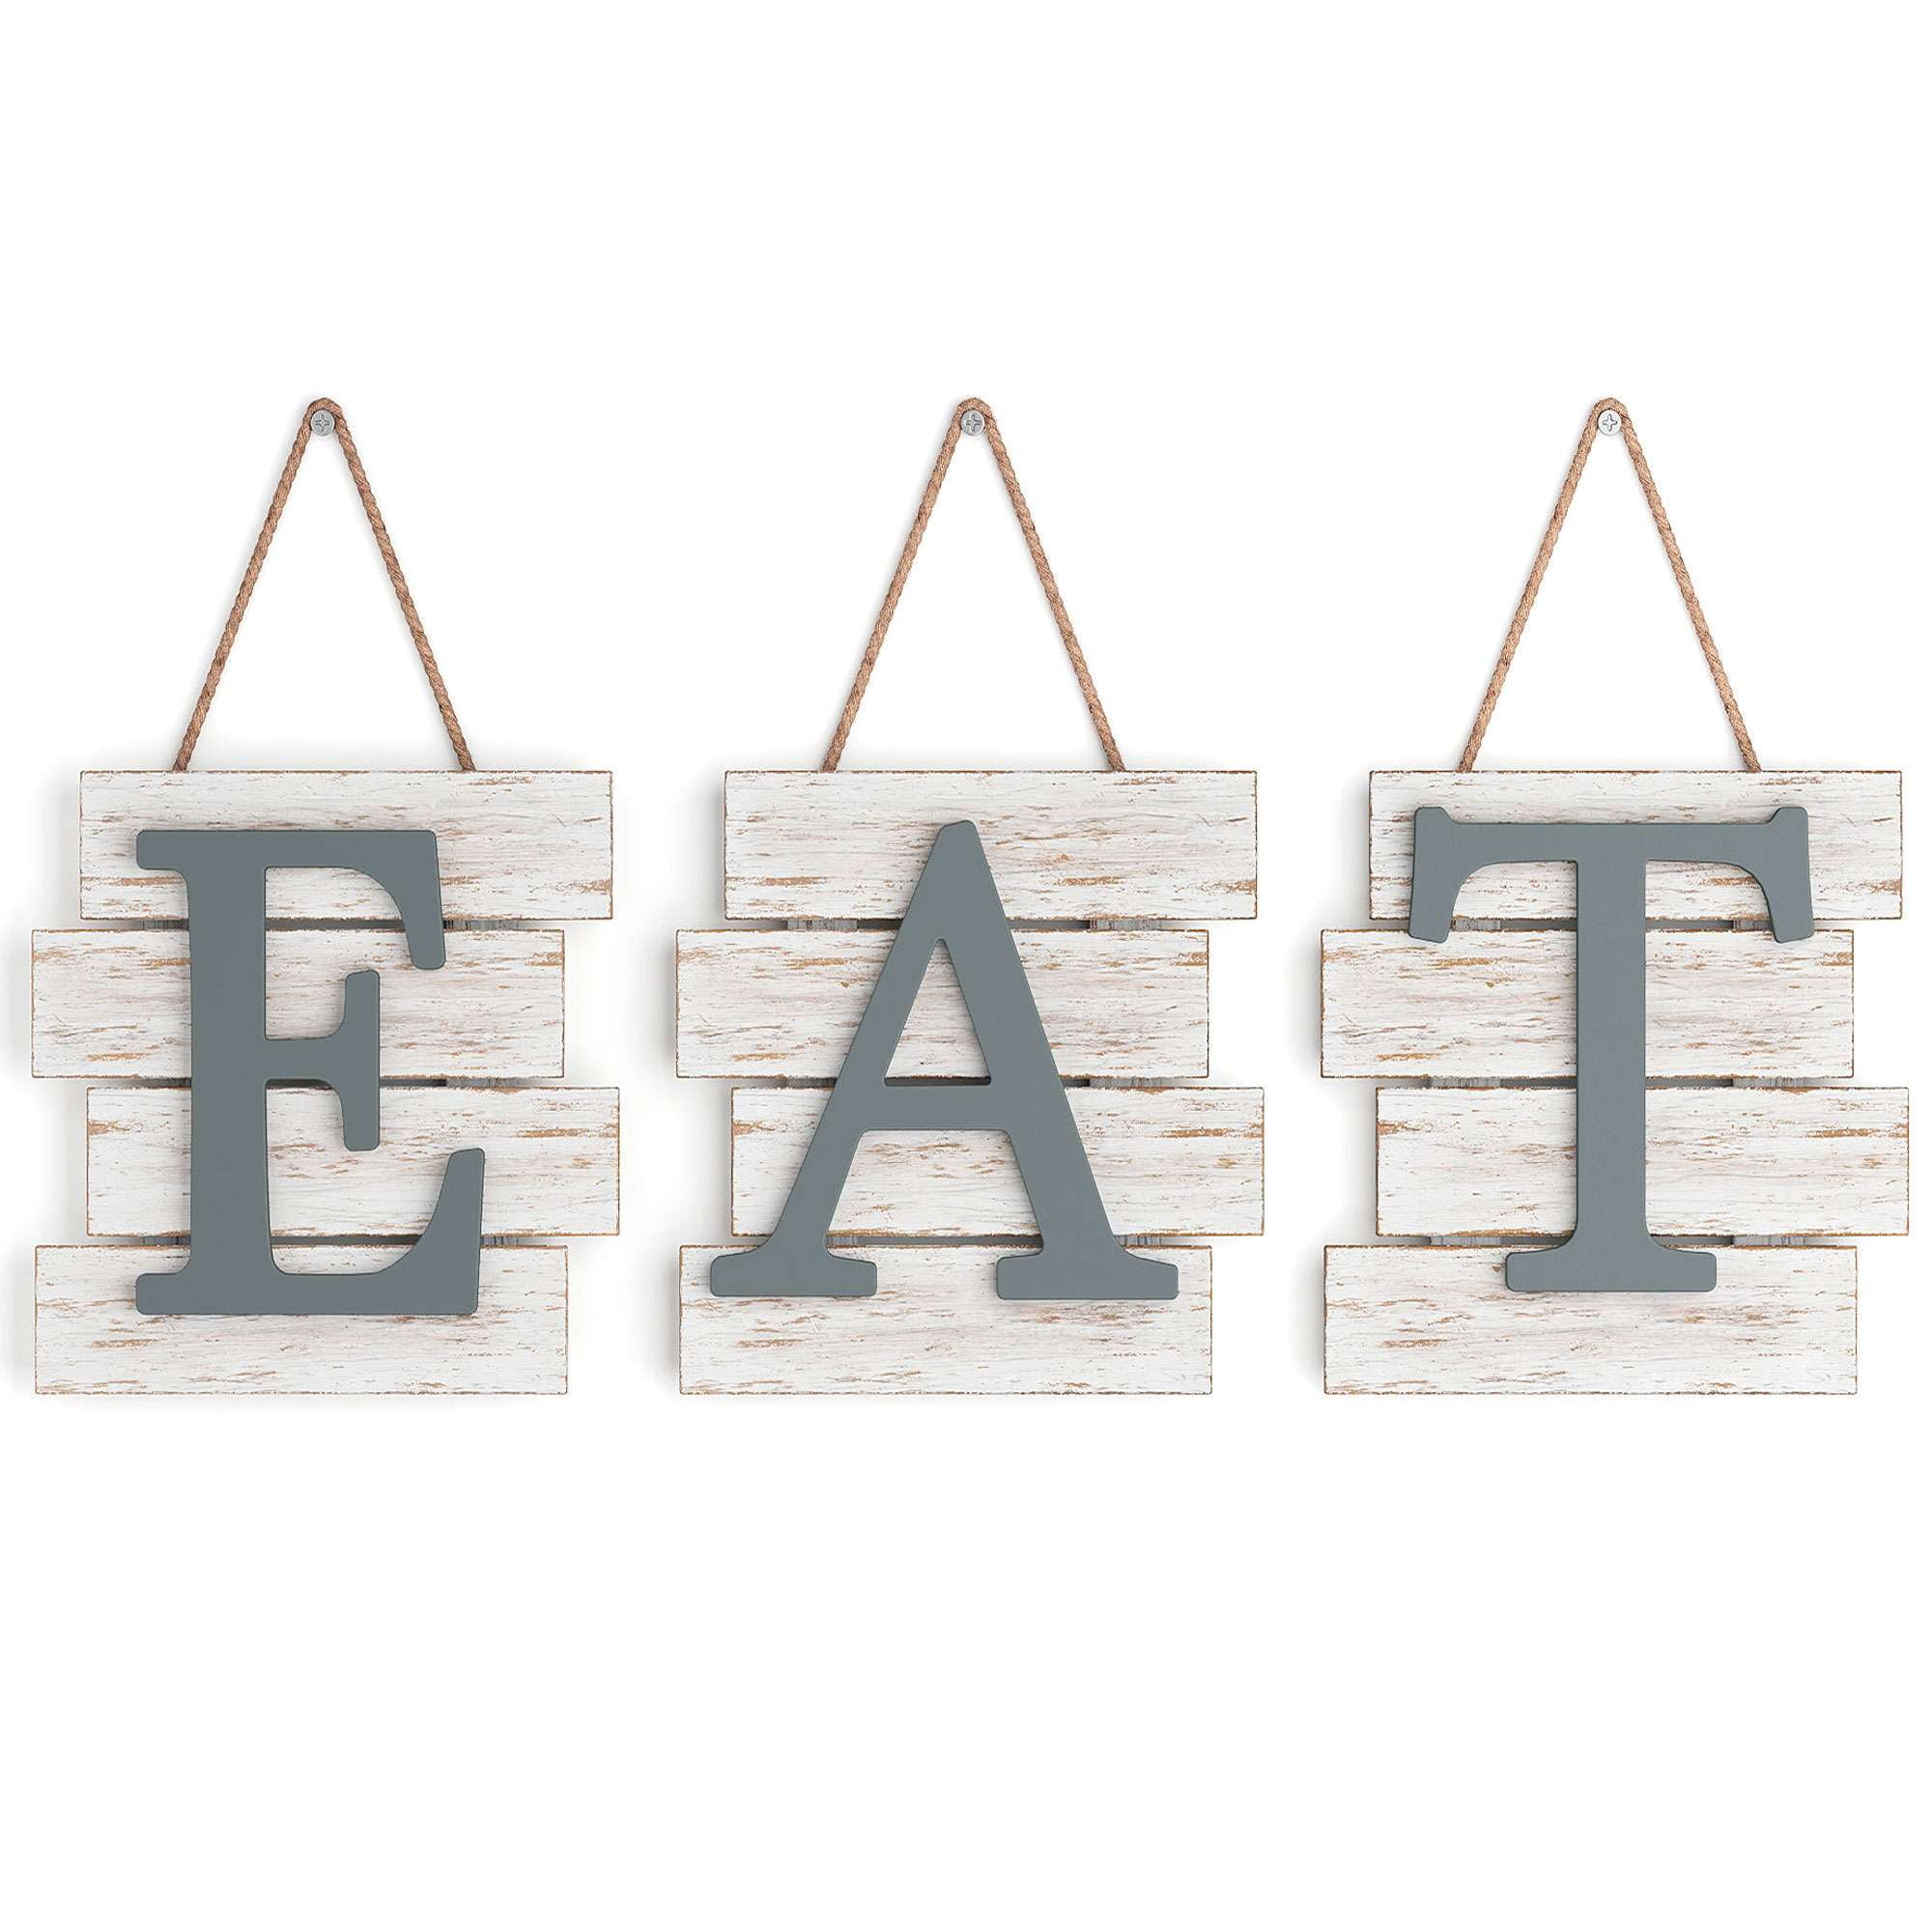 KITCHEN Metal Wall Art Word Quote Sign Decor Steel RUSTIC HOME 9 x 2.5 in New 